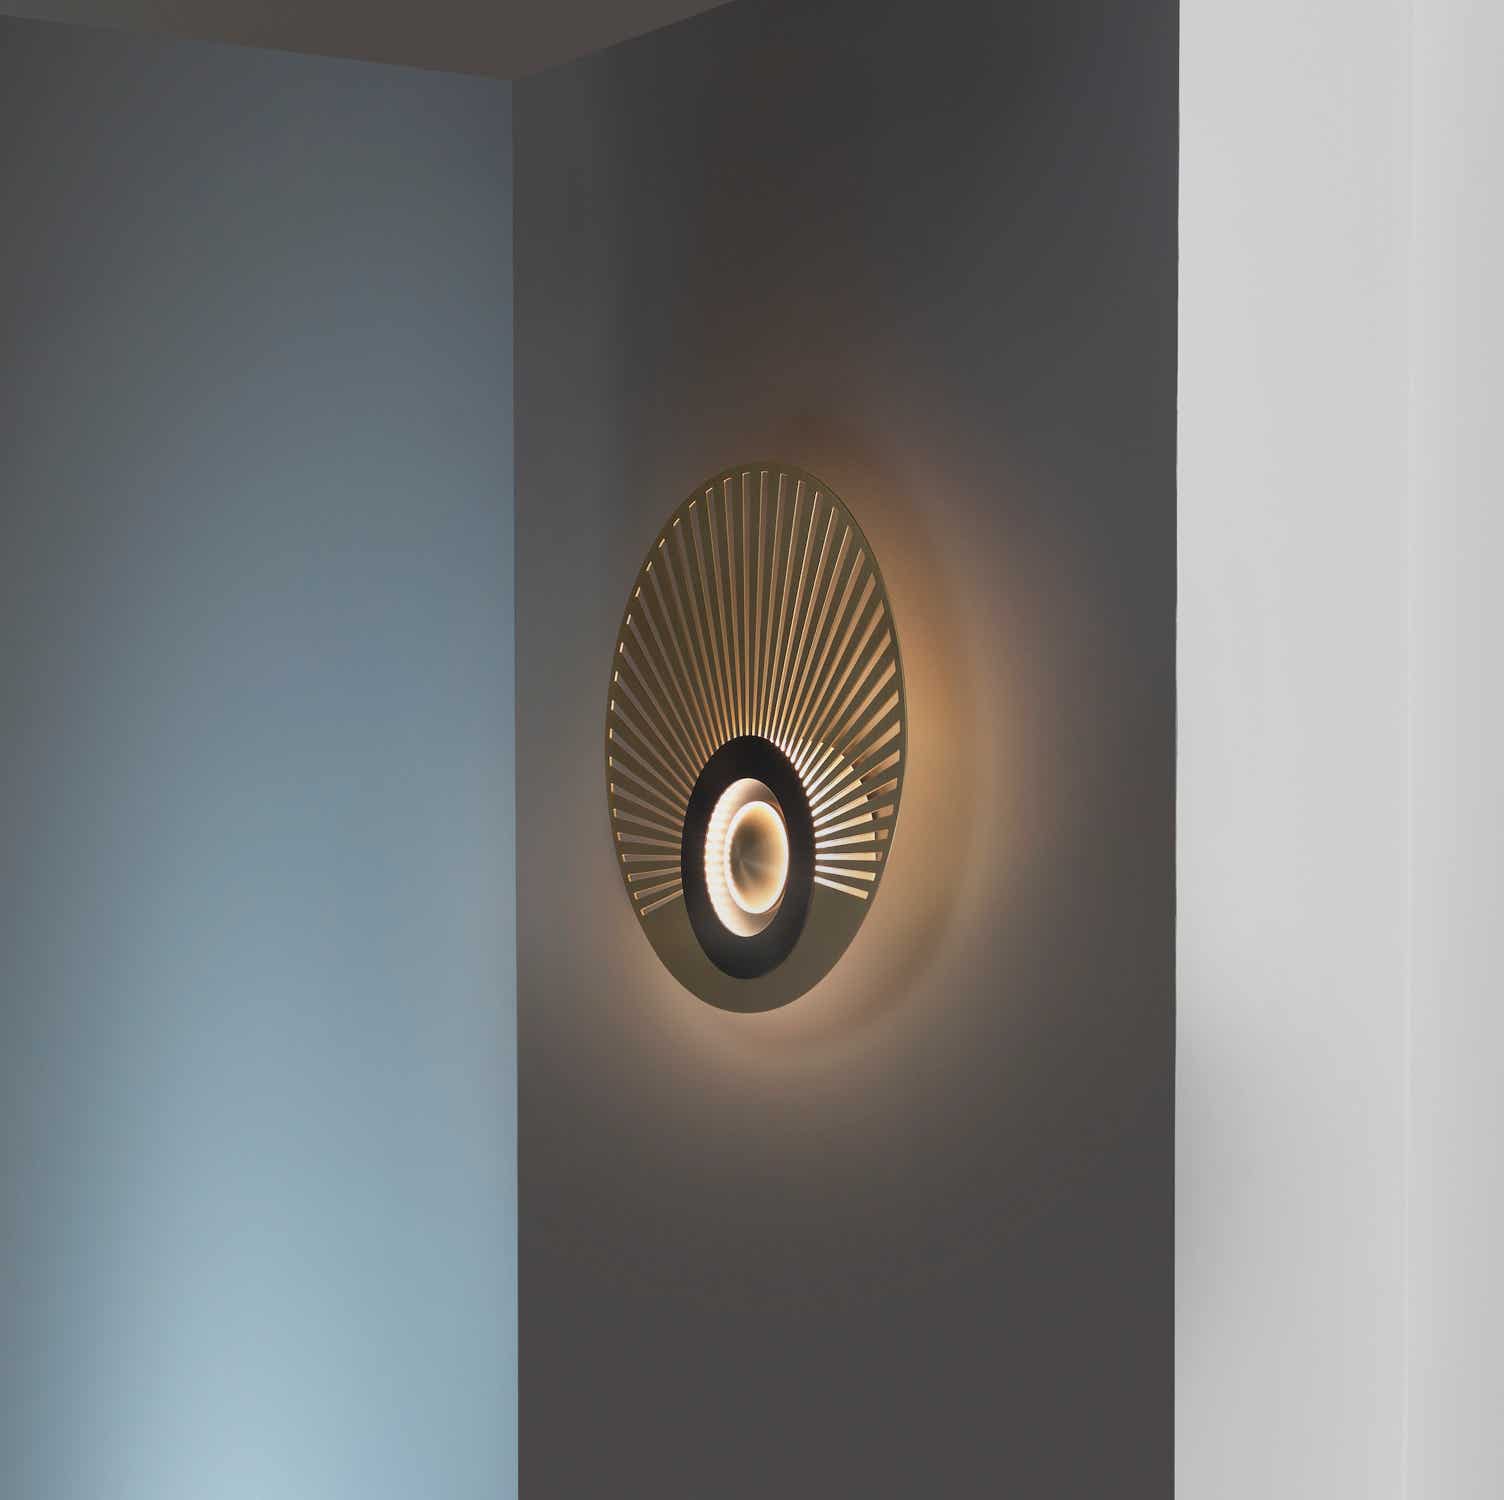  Radian wall / ceiling lamp Earth collection  Émilie Cathelineau, 2019